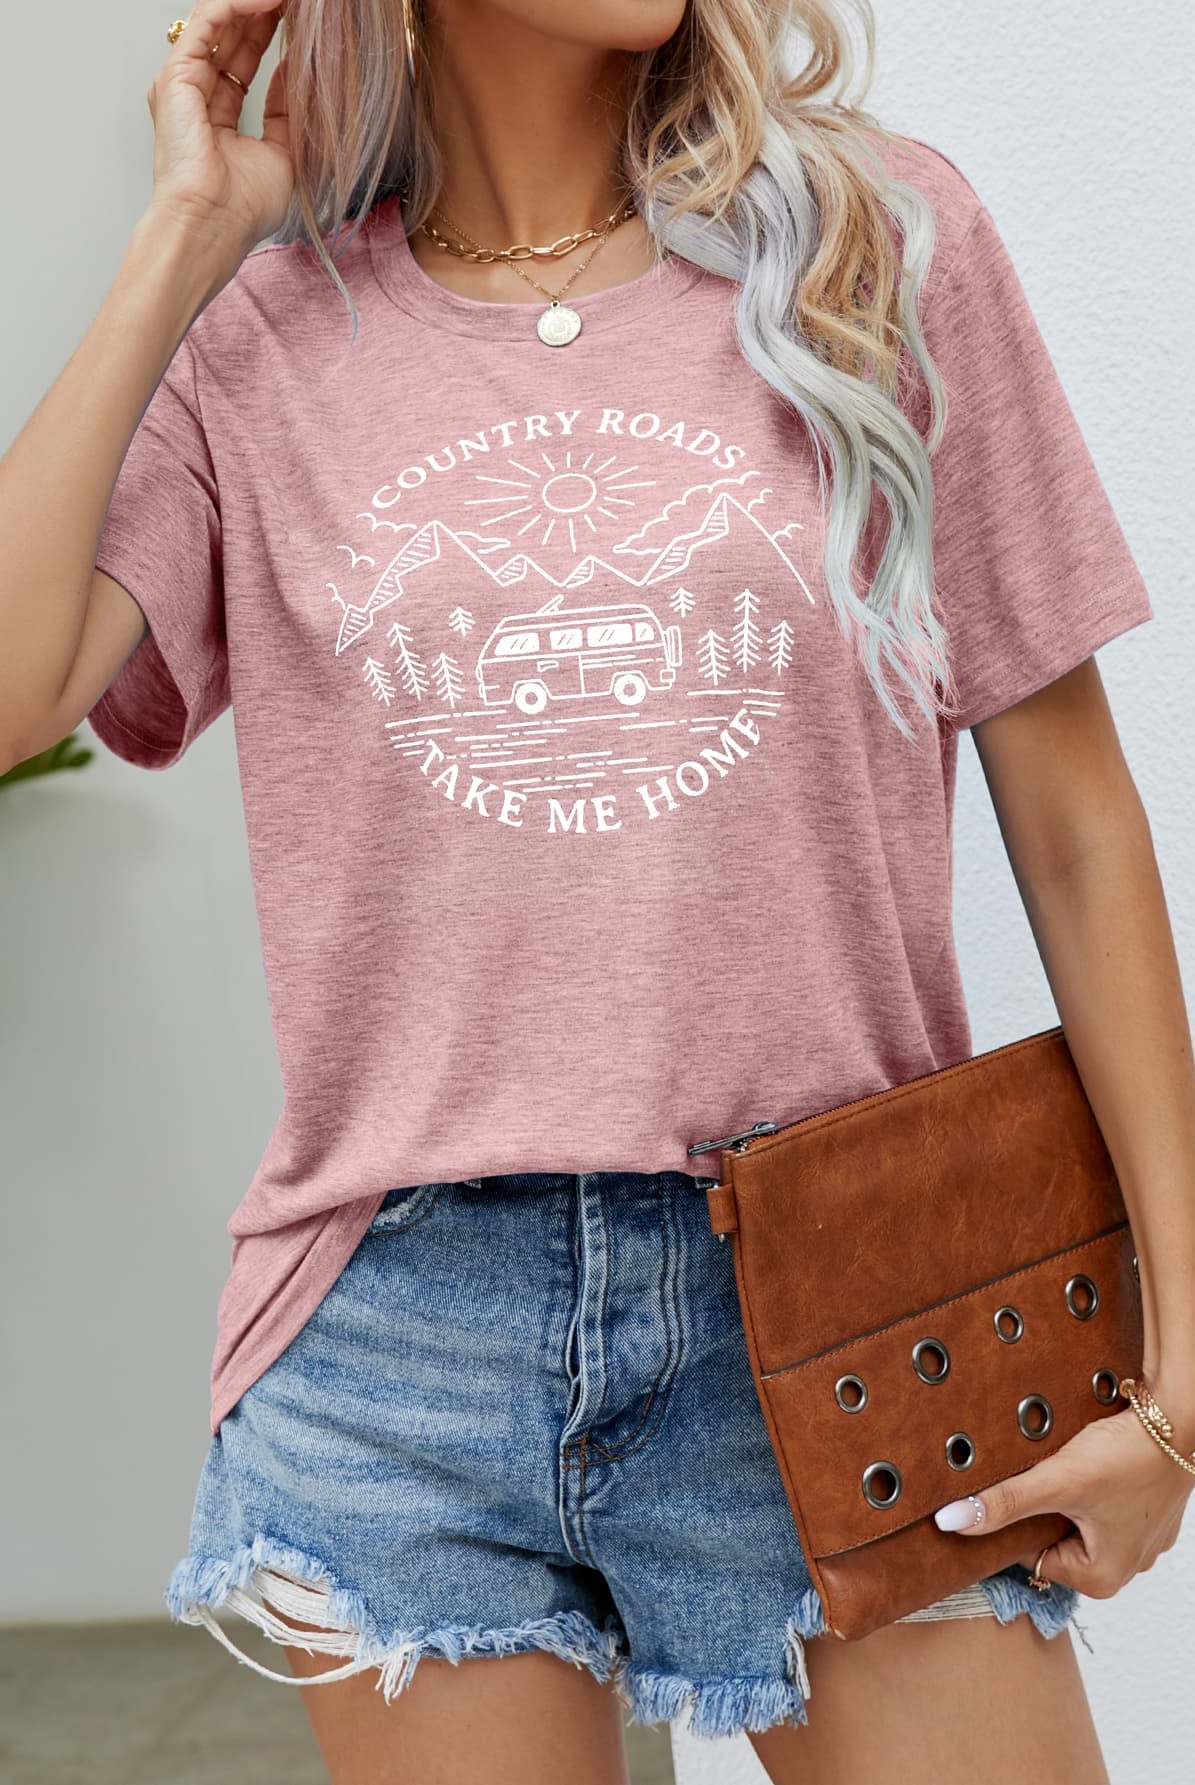 Dark Gray COUNTRY ROADS TAKE ME HOME Graphic Tee Tops